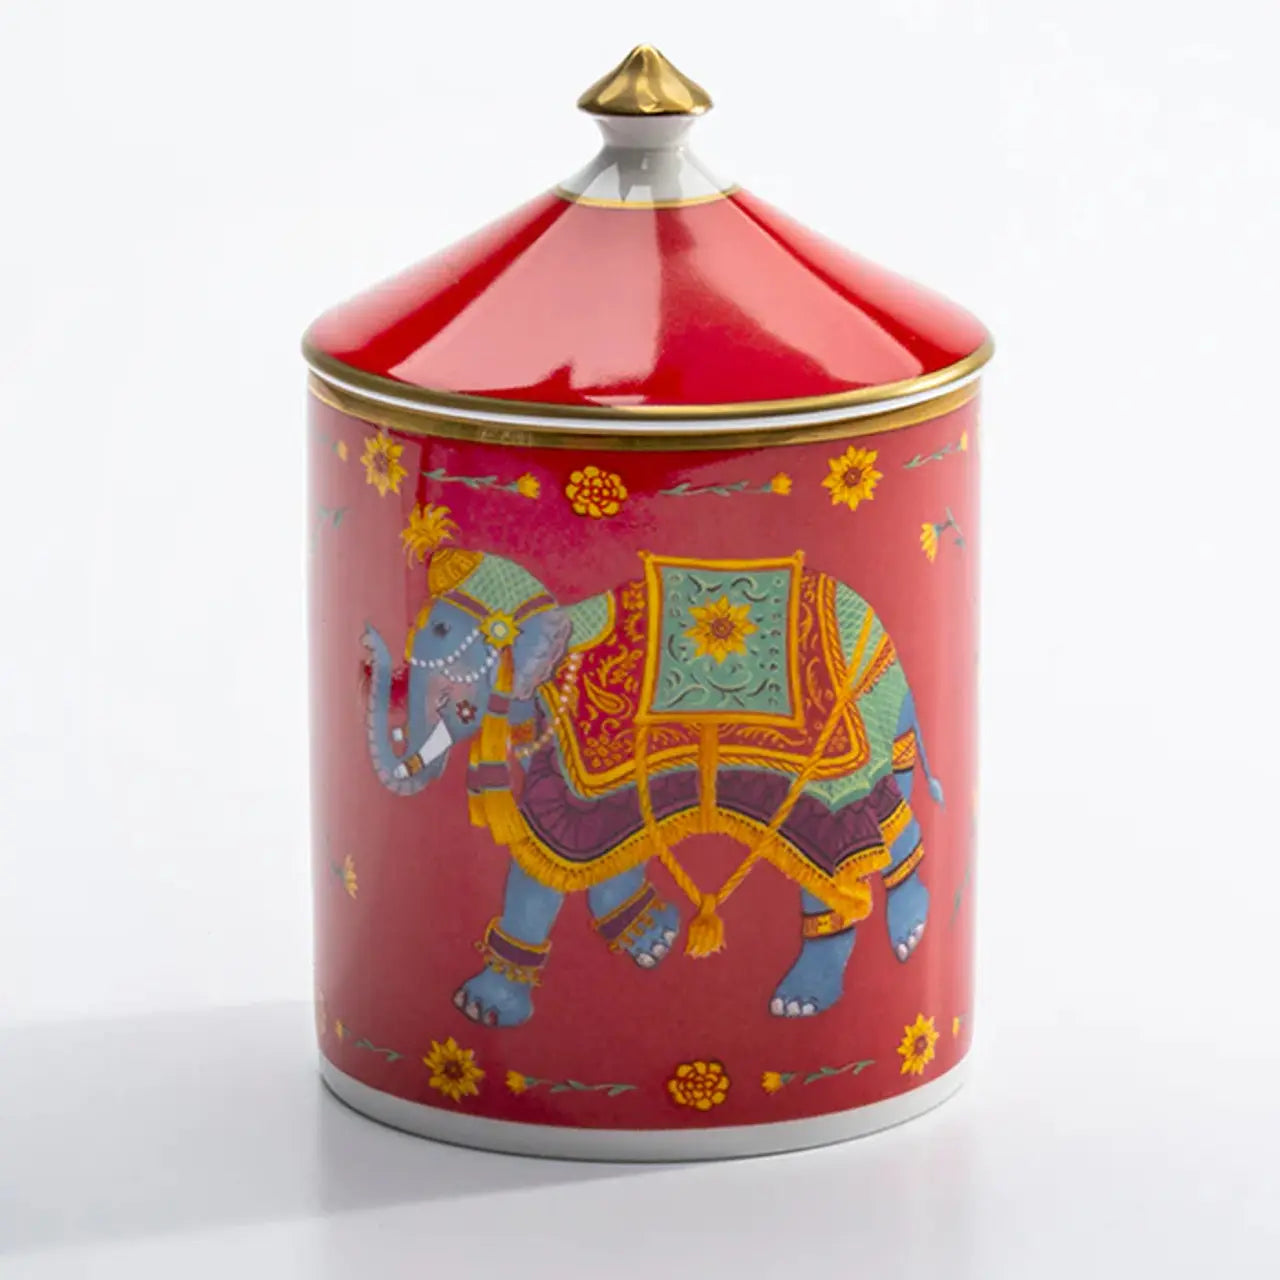 Halcyon Days Ceremonial Indian Elephant Red Rose Lidded Candle